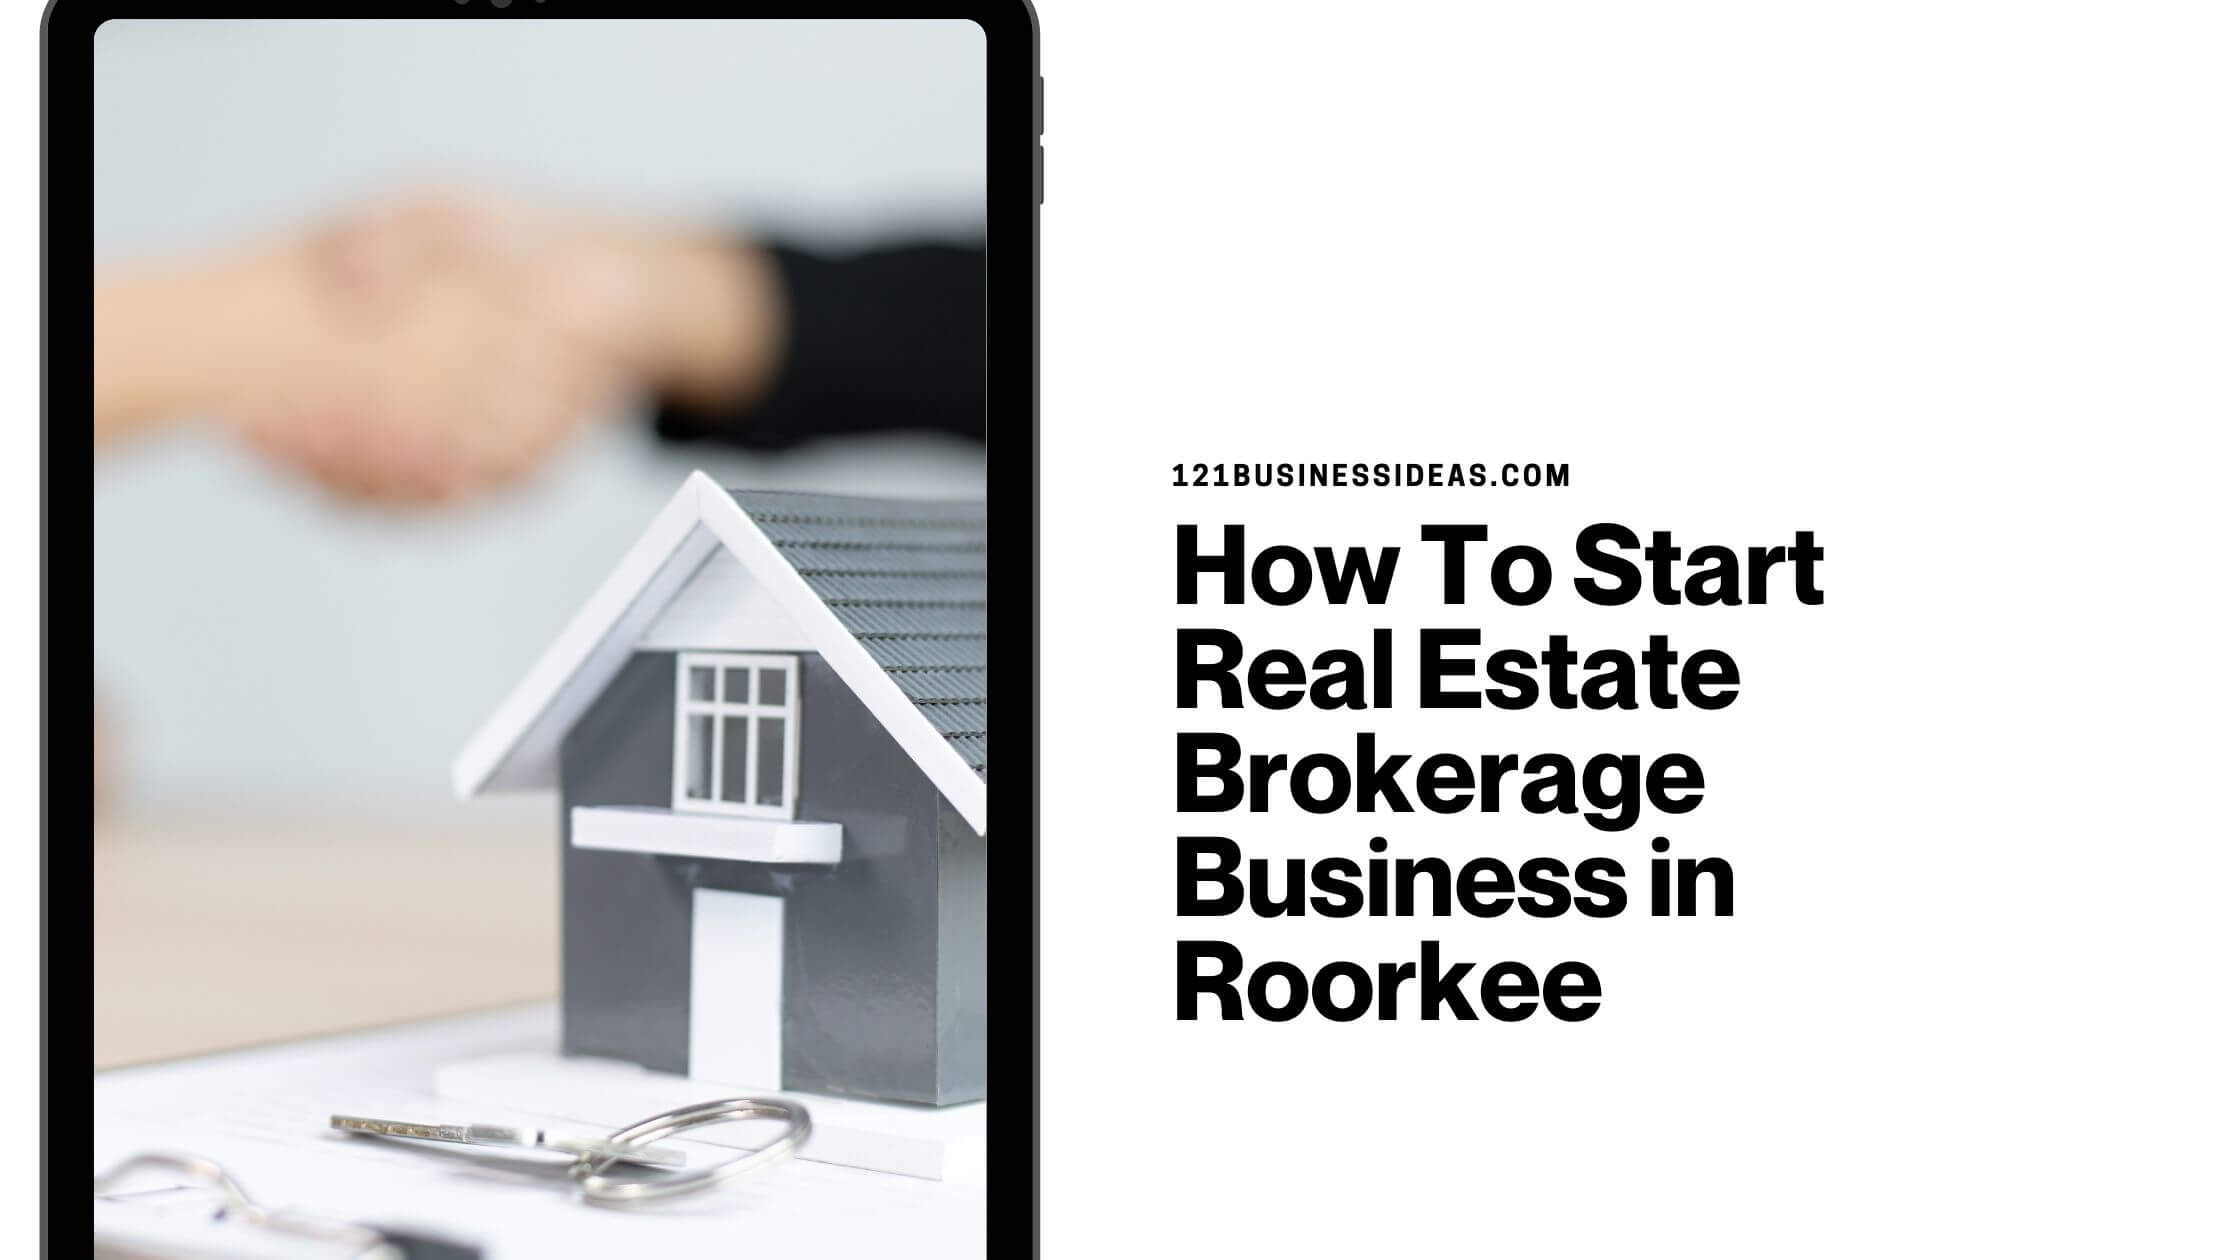 How To Start Real Estate Brokerage Business in Roorkee (1)